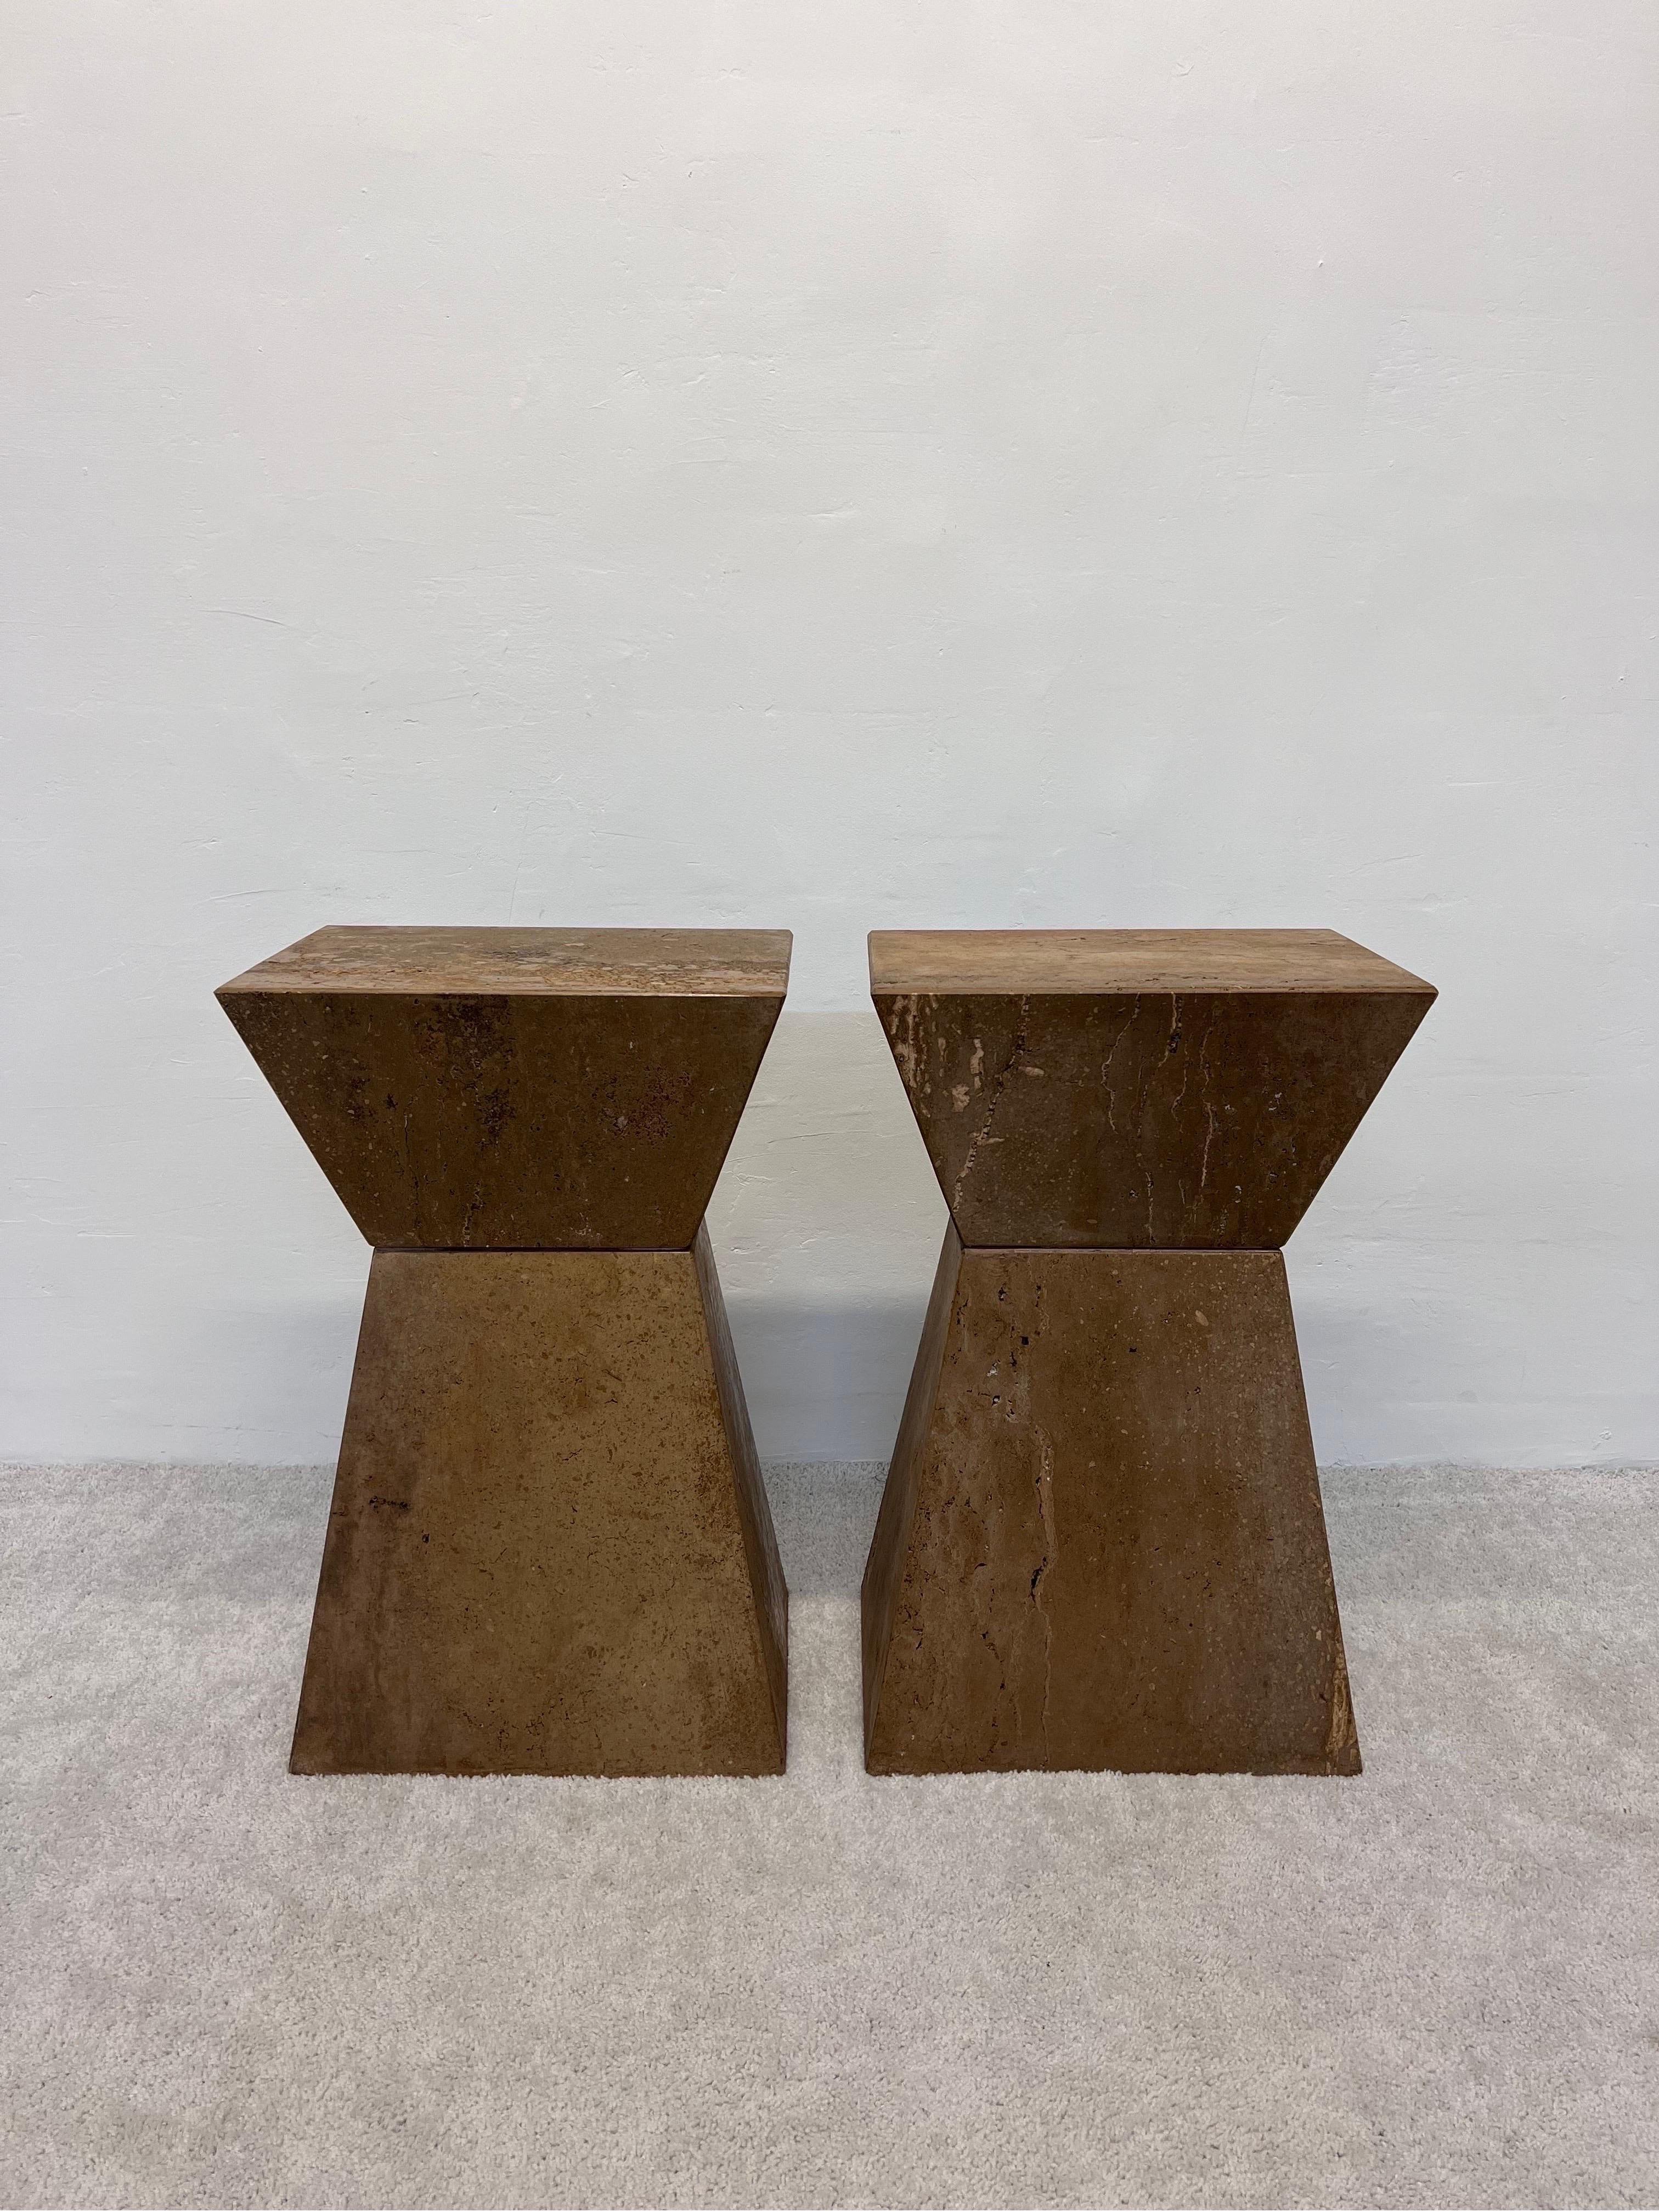 Pair of Italian travertine geometric pedestal tables, 1980s. These could also be used as bases for a dining or console table.